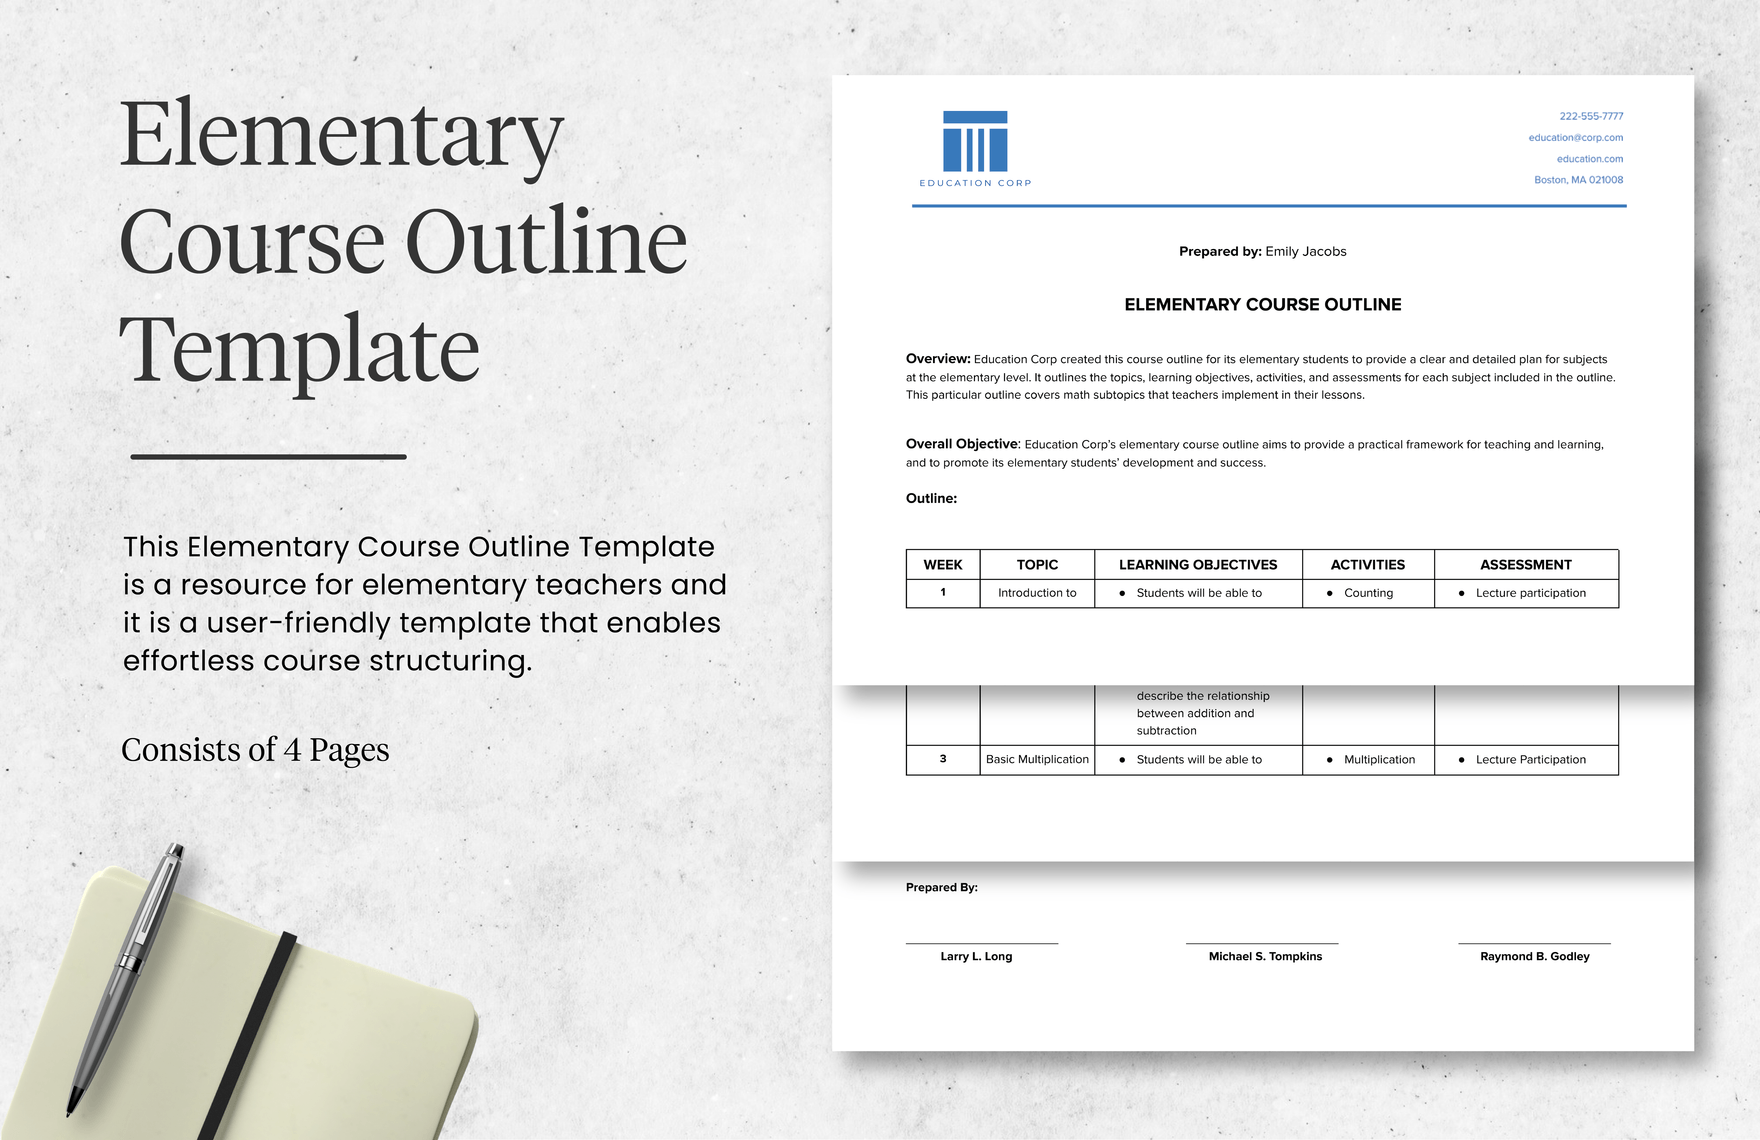 Elementary Course Outline Template in Word Google Docs Download